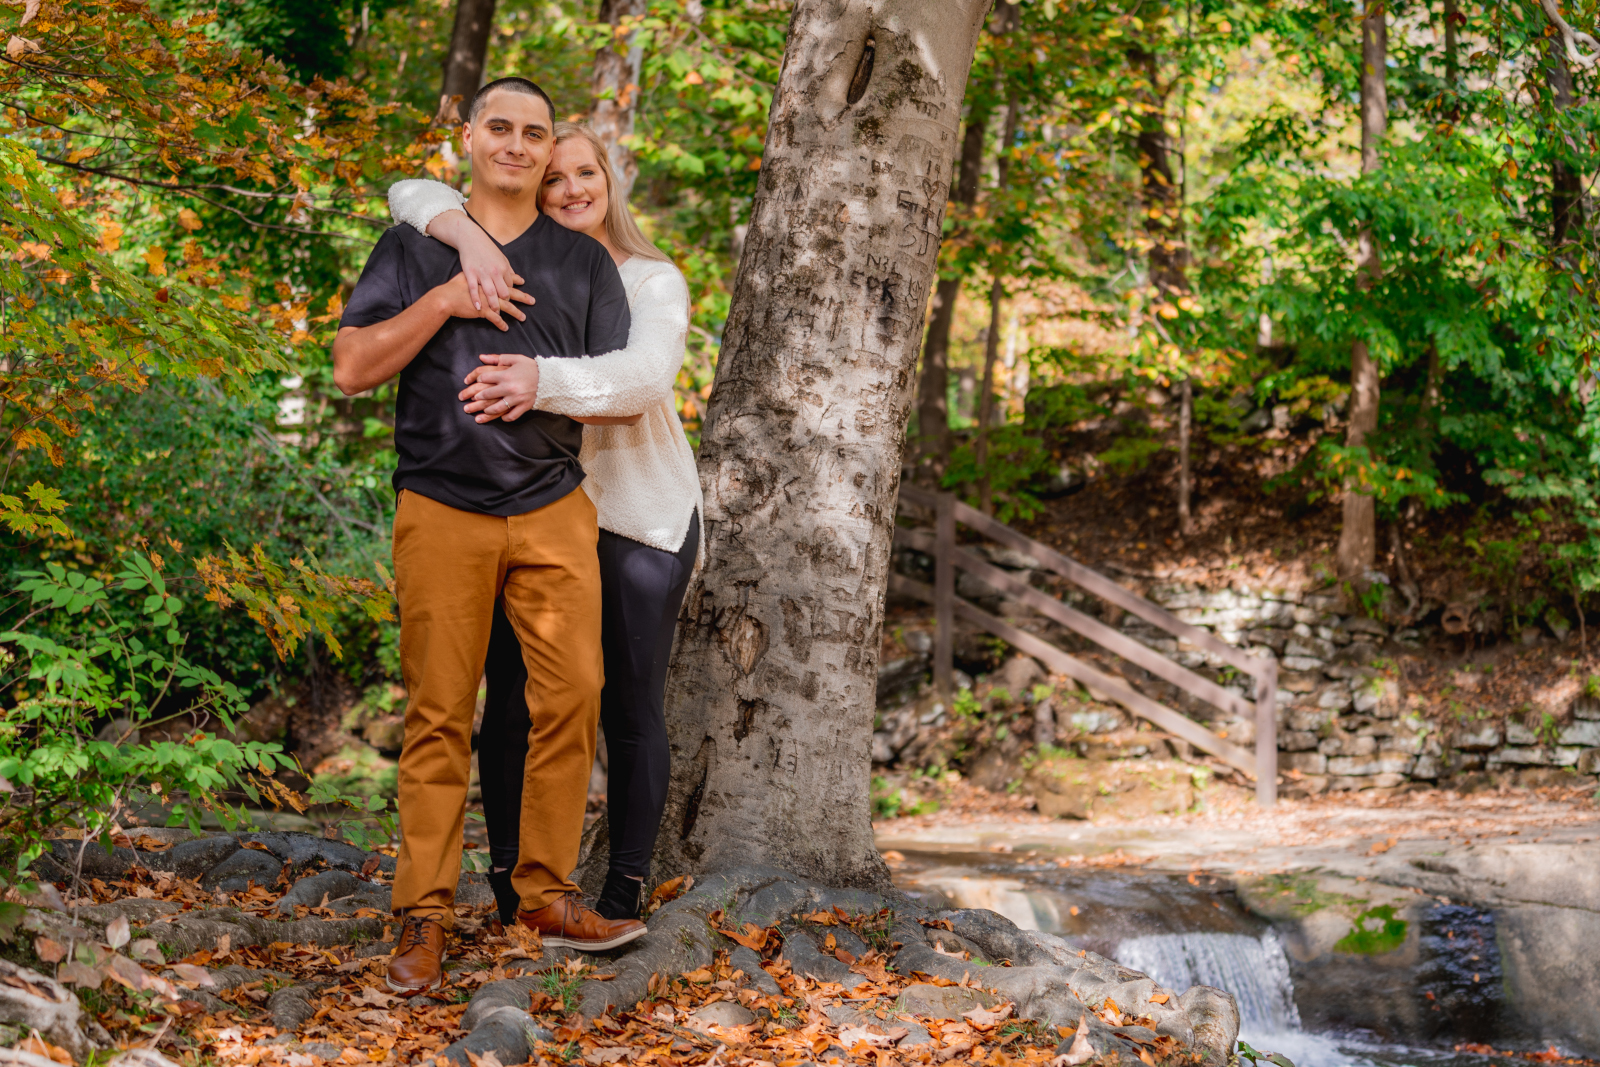 Man and woman fiancee engagement photo, couple portrait, cute, trees, fall leaves, fall colors, trees, nature, outdoor fall engagement photo session at Grand Pacific Junction Historic Shopping District